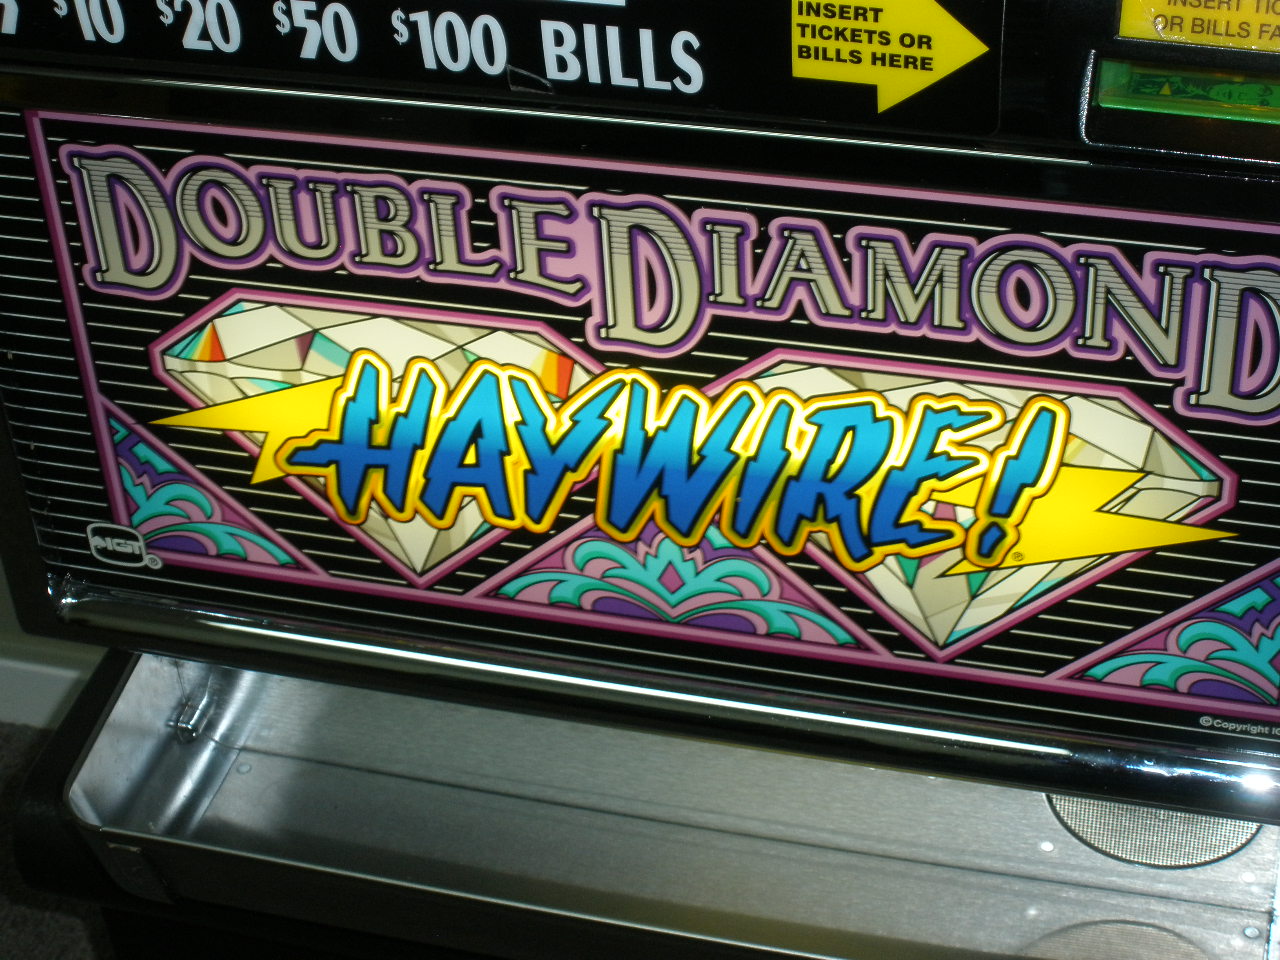 IGT DOUBLE DIAMOND HAYWIRE S2000 SLOT MACHINE For Sale • Gambler's Oasis USA